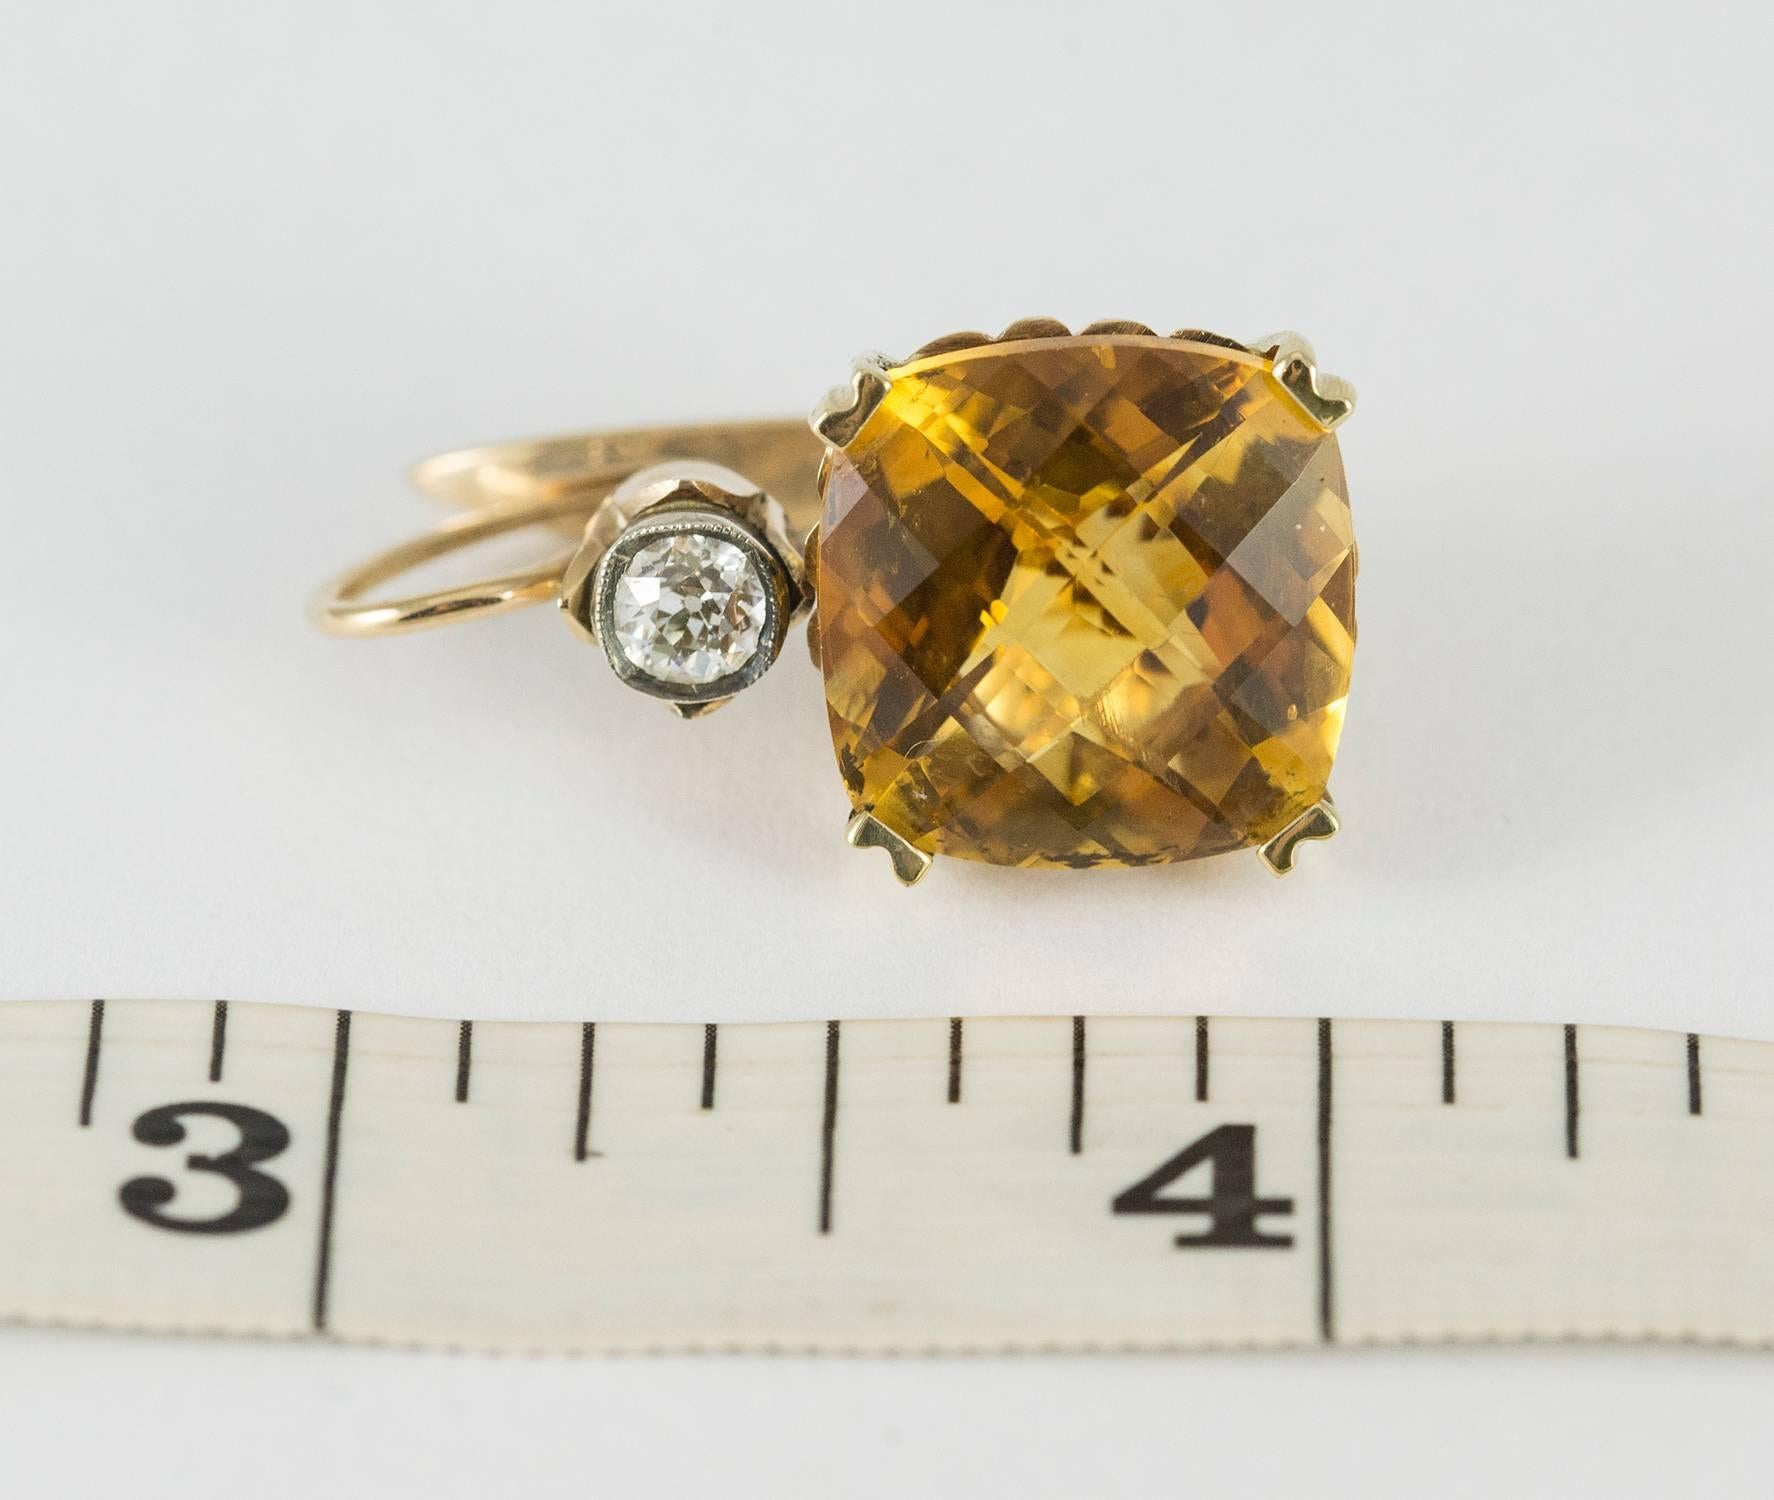 These unique earrings are set in 14k yellow gold with two square cushion mixed cut citrines 24.85 ct.tw. They appear to be Russian in origin. The citrines are bright and have a strong saturation of yellow, orange and cognac. Embellishing the top of